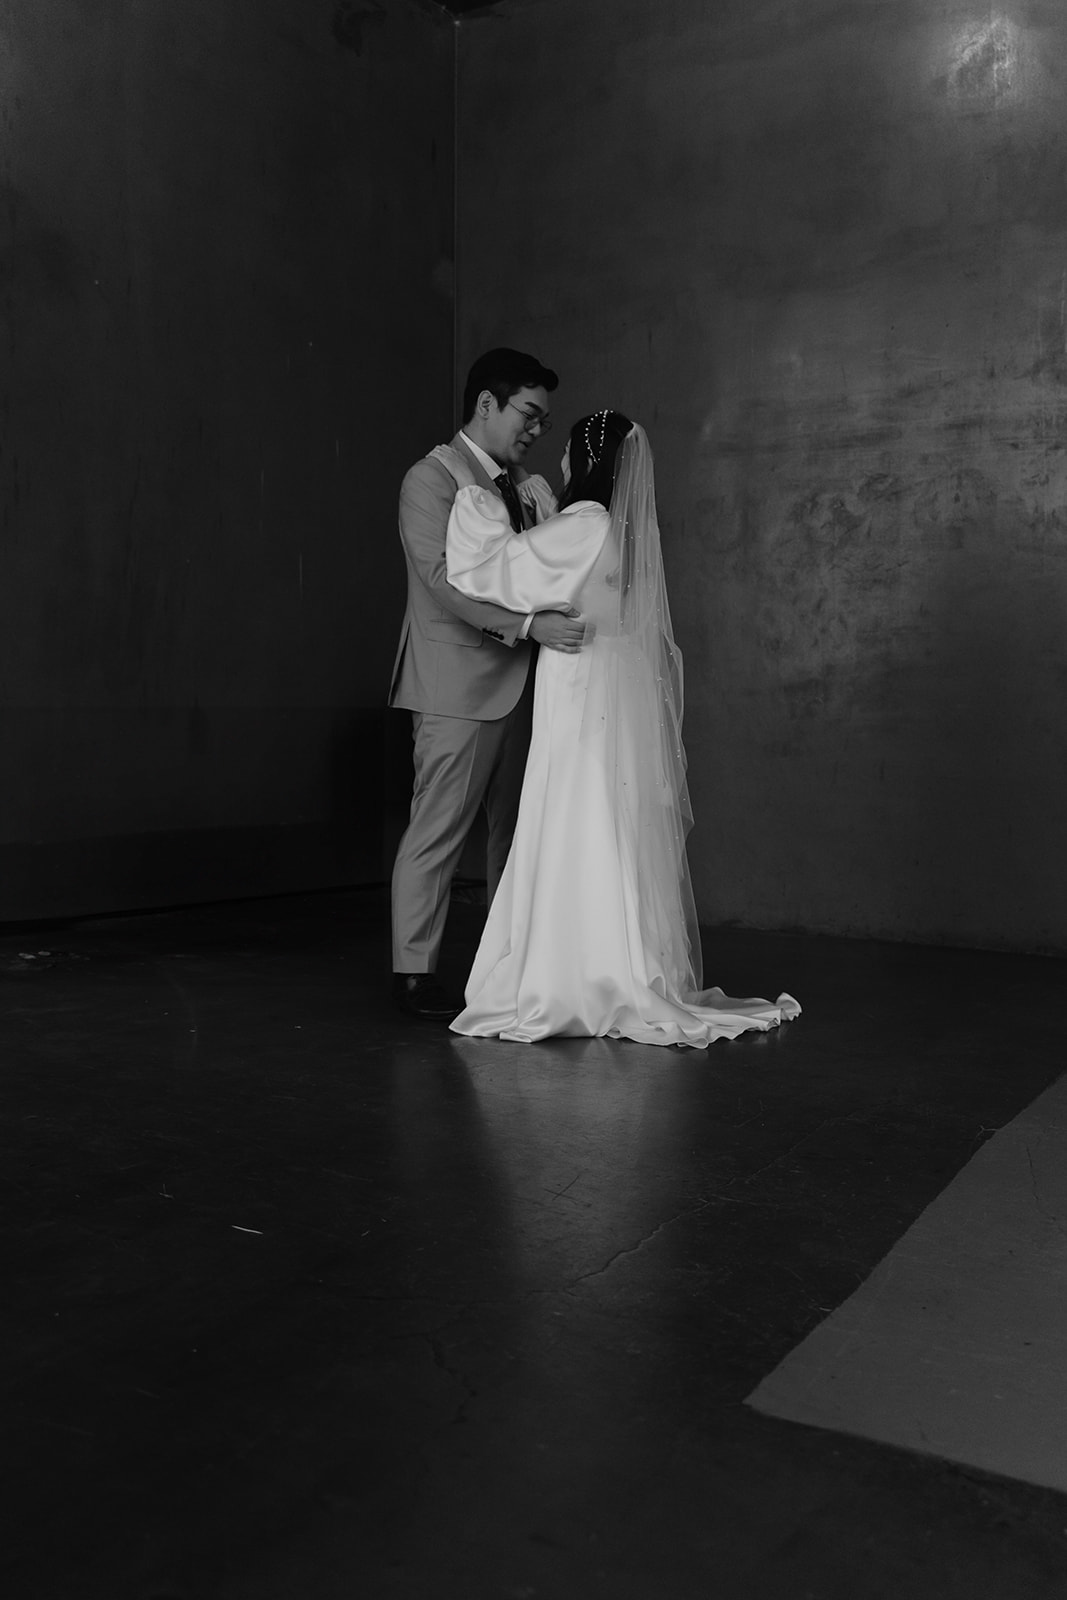 A bride and groom in elegant attire share a tender moment, dancing closely together in a dimly lit room.